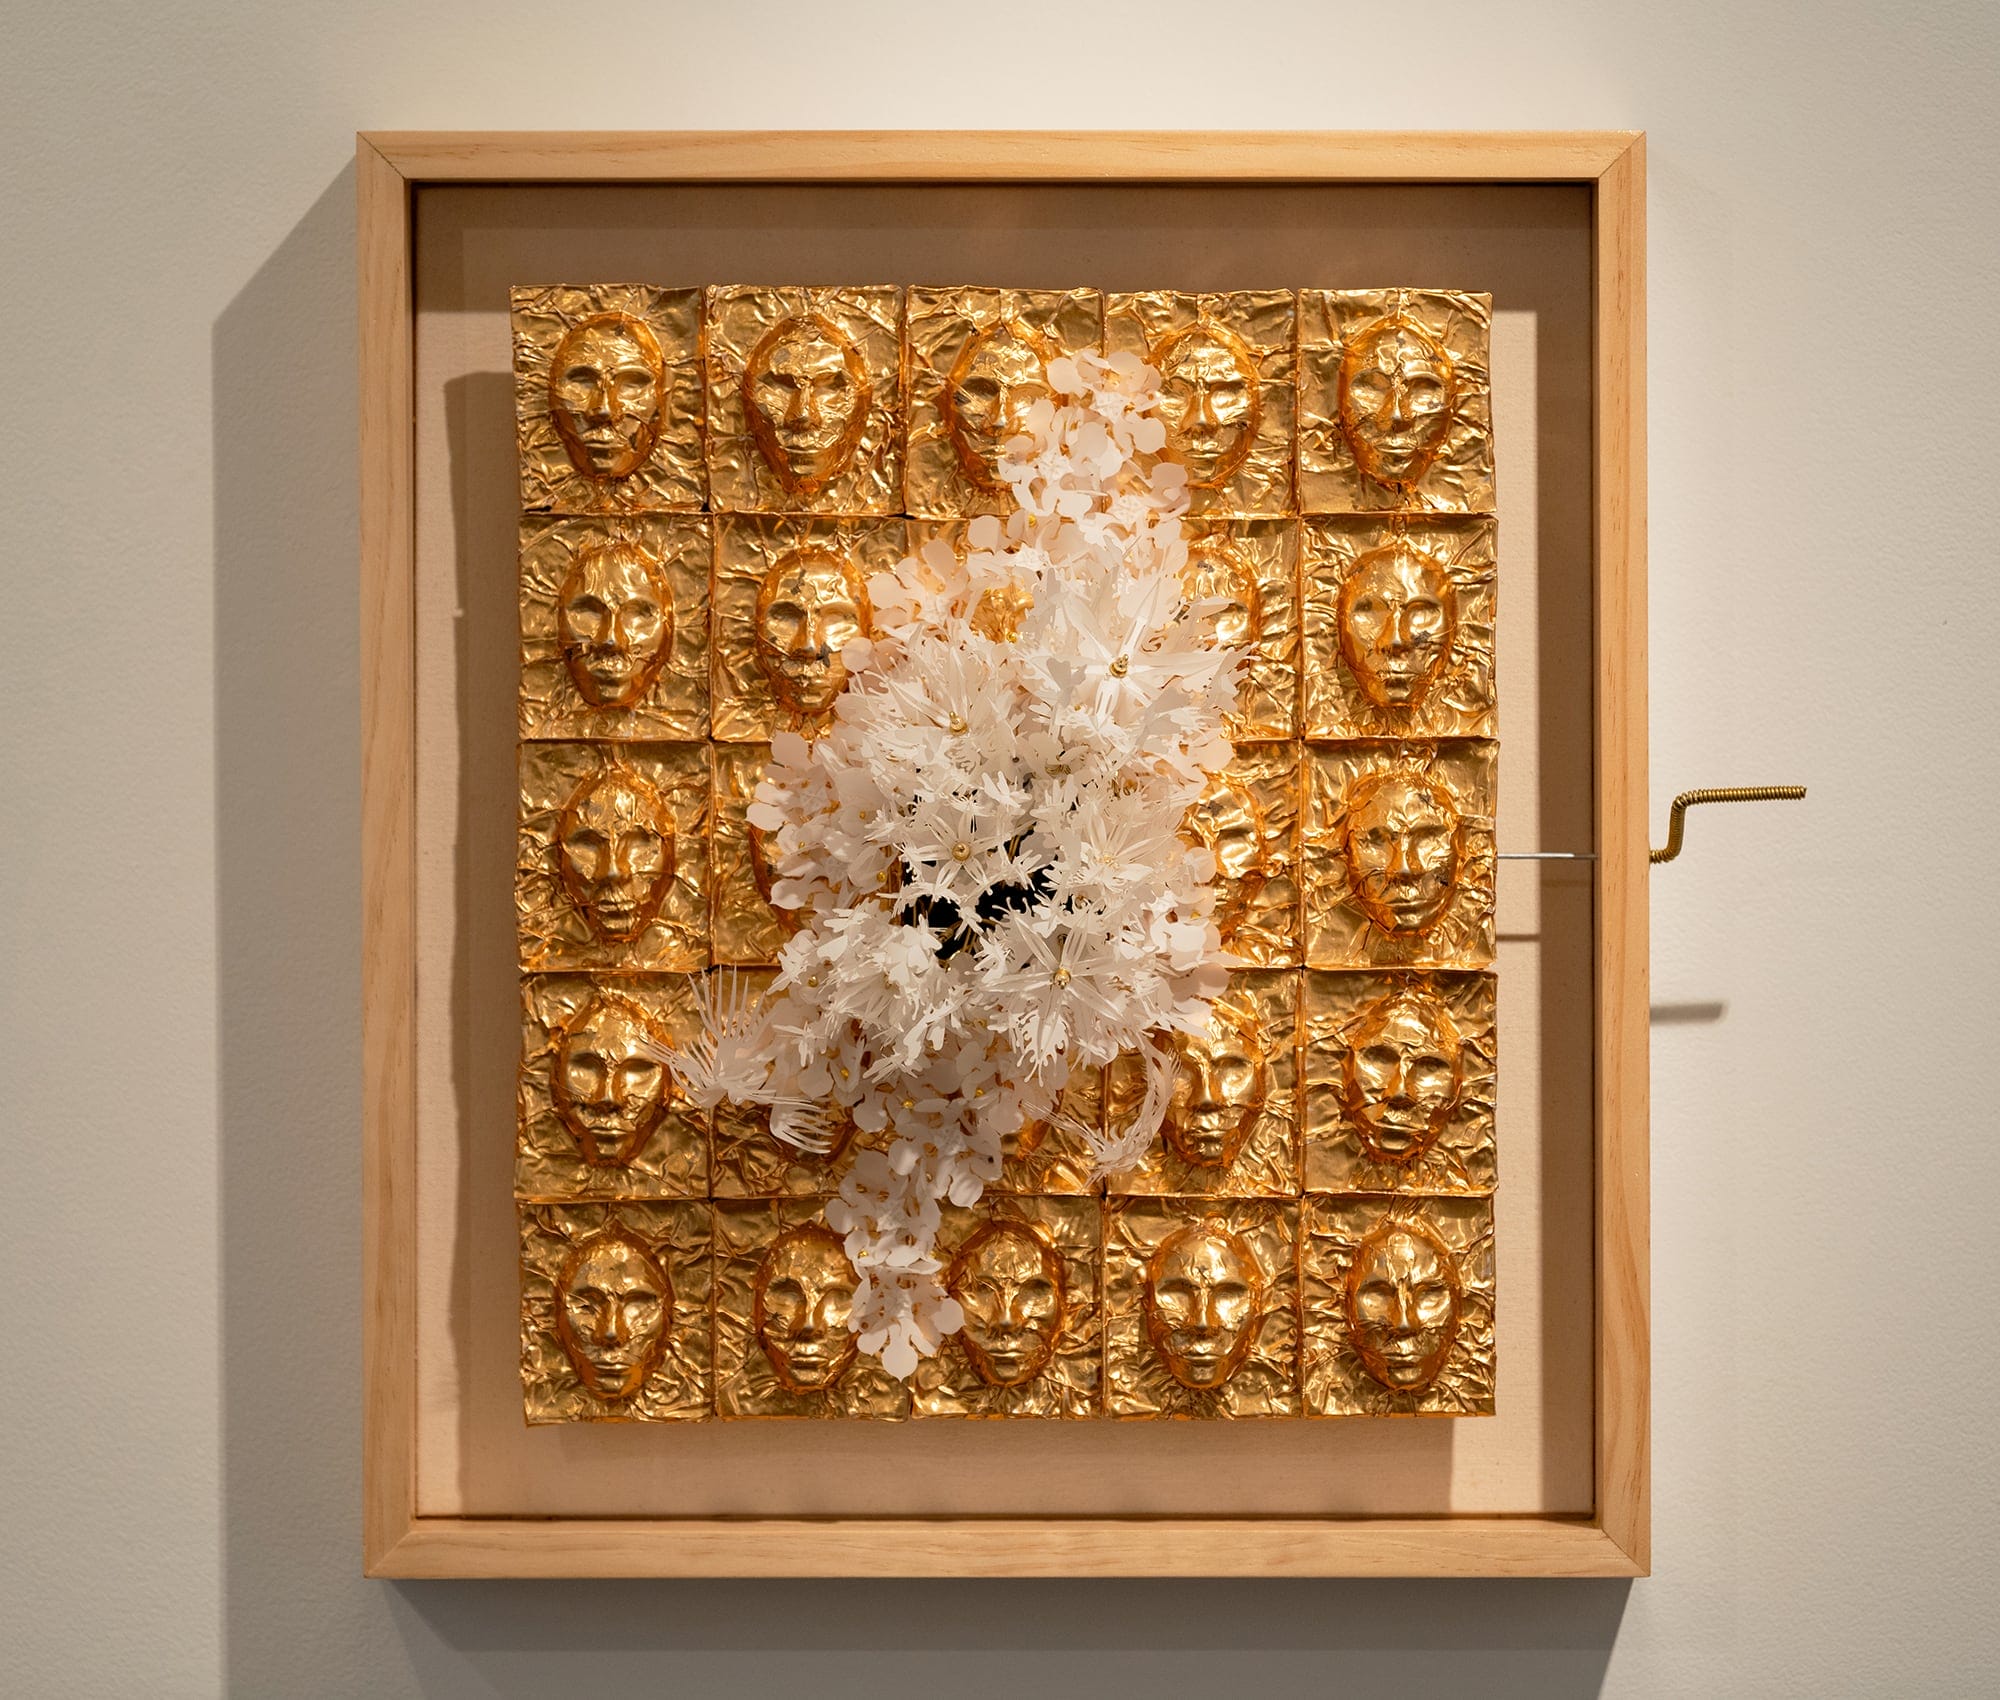 a grid of gold faces with a white fluttering mass on top in a wooden frame with a hand crank to the right